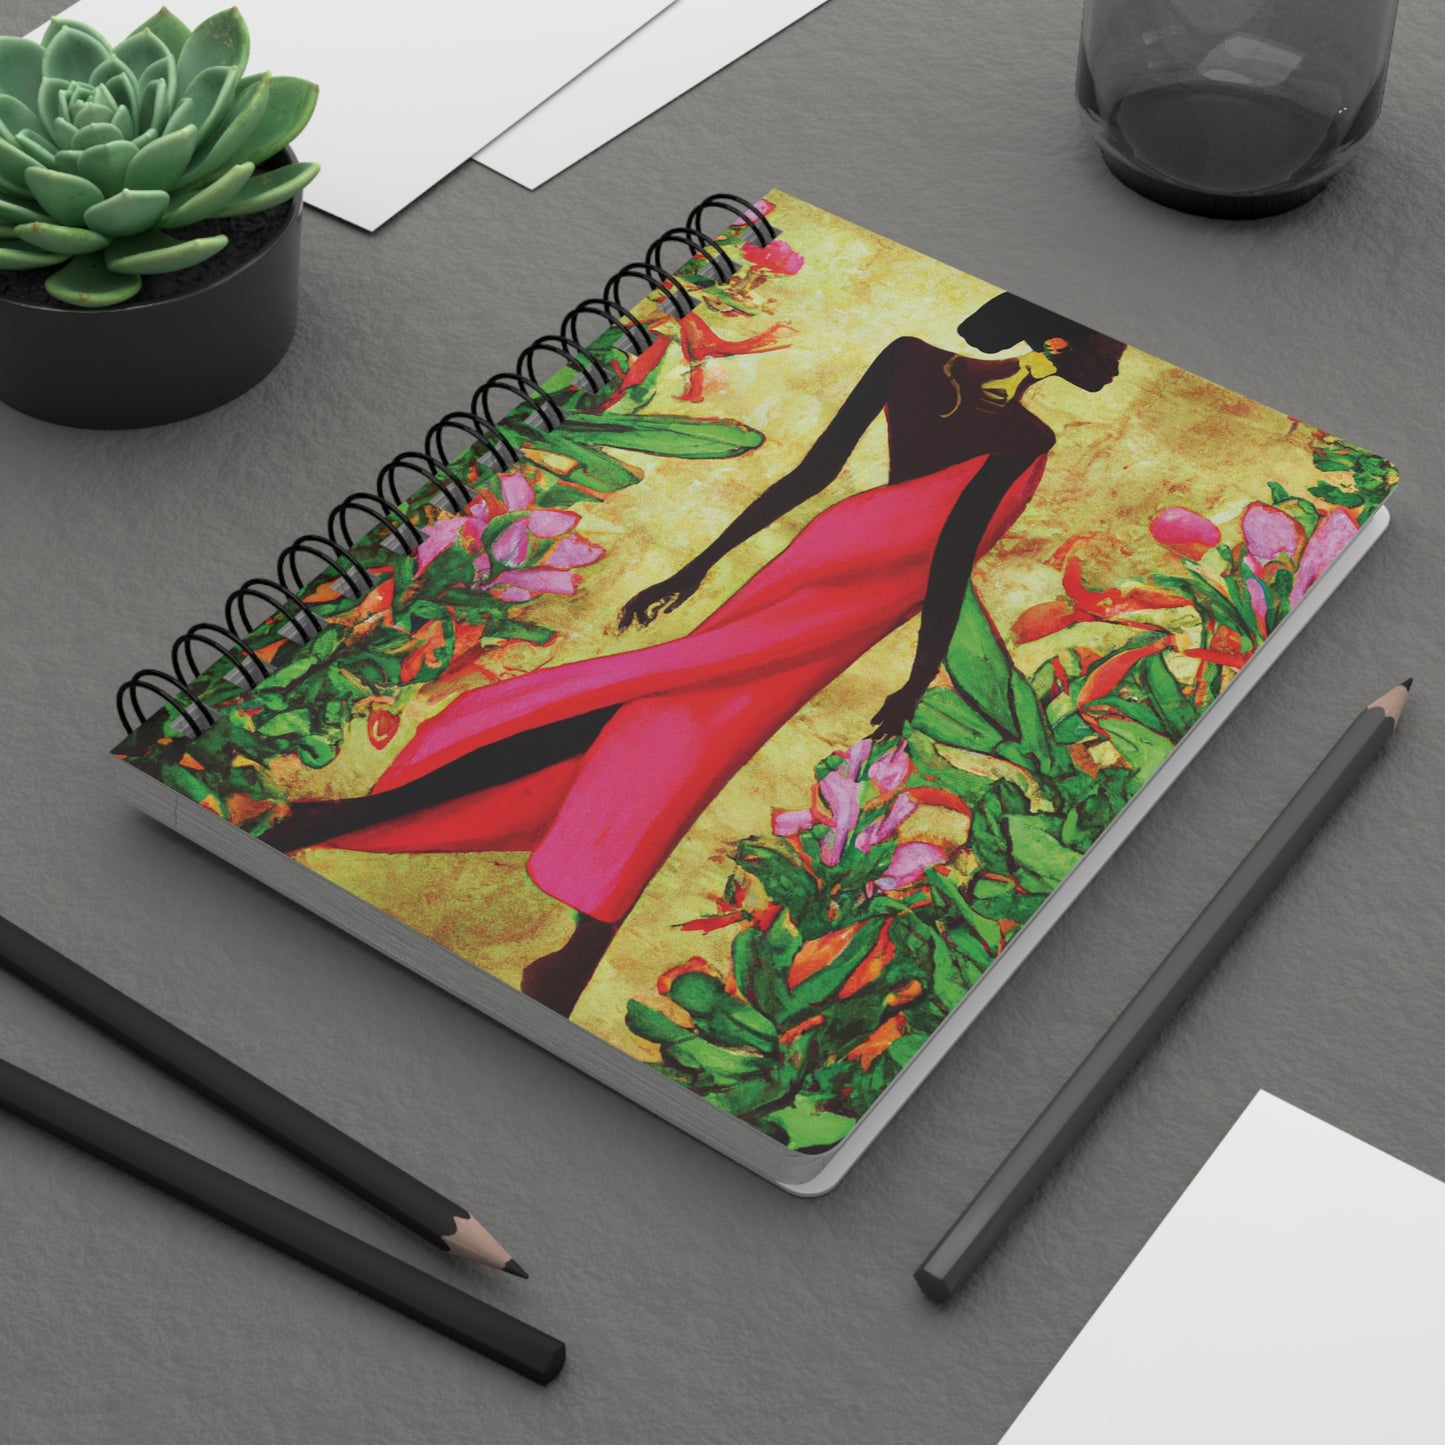 Enchanted Gardens Spiral Bound Notebooks and Journals with 2023-2024 Year-at-a-Glance Calendar